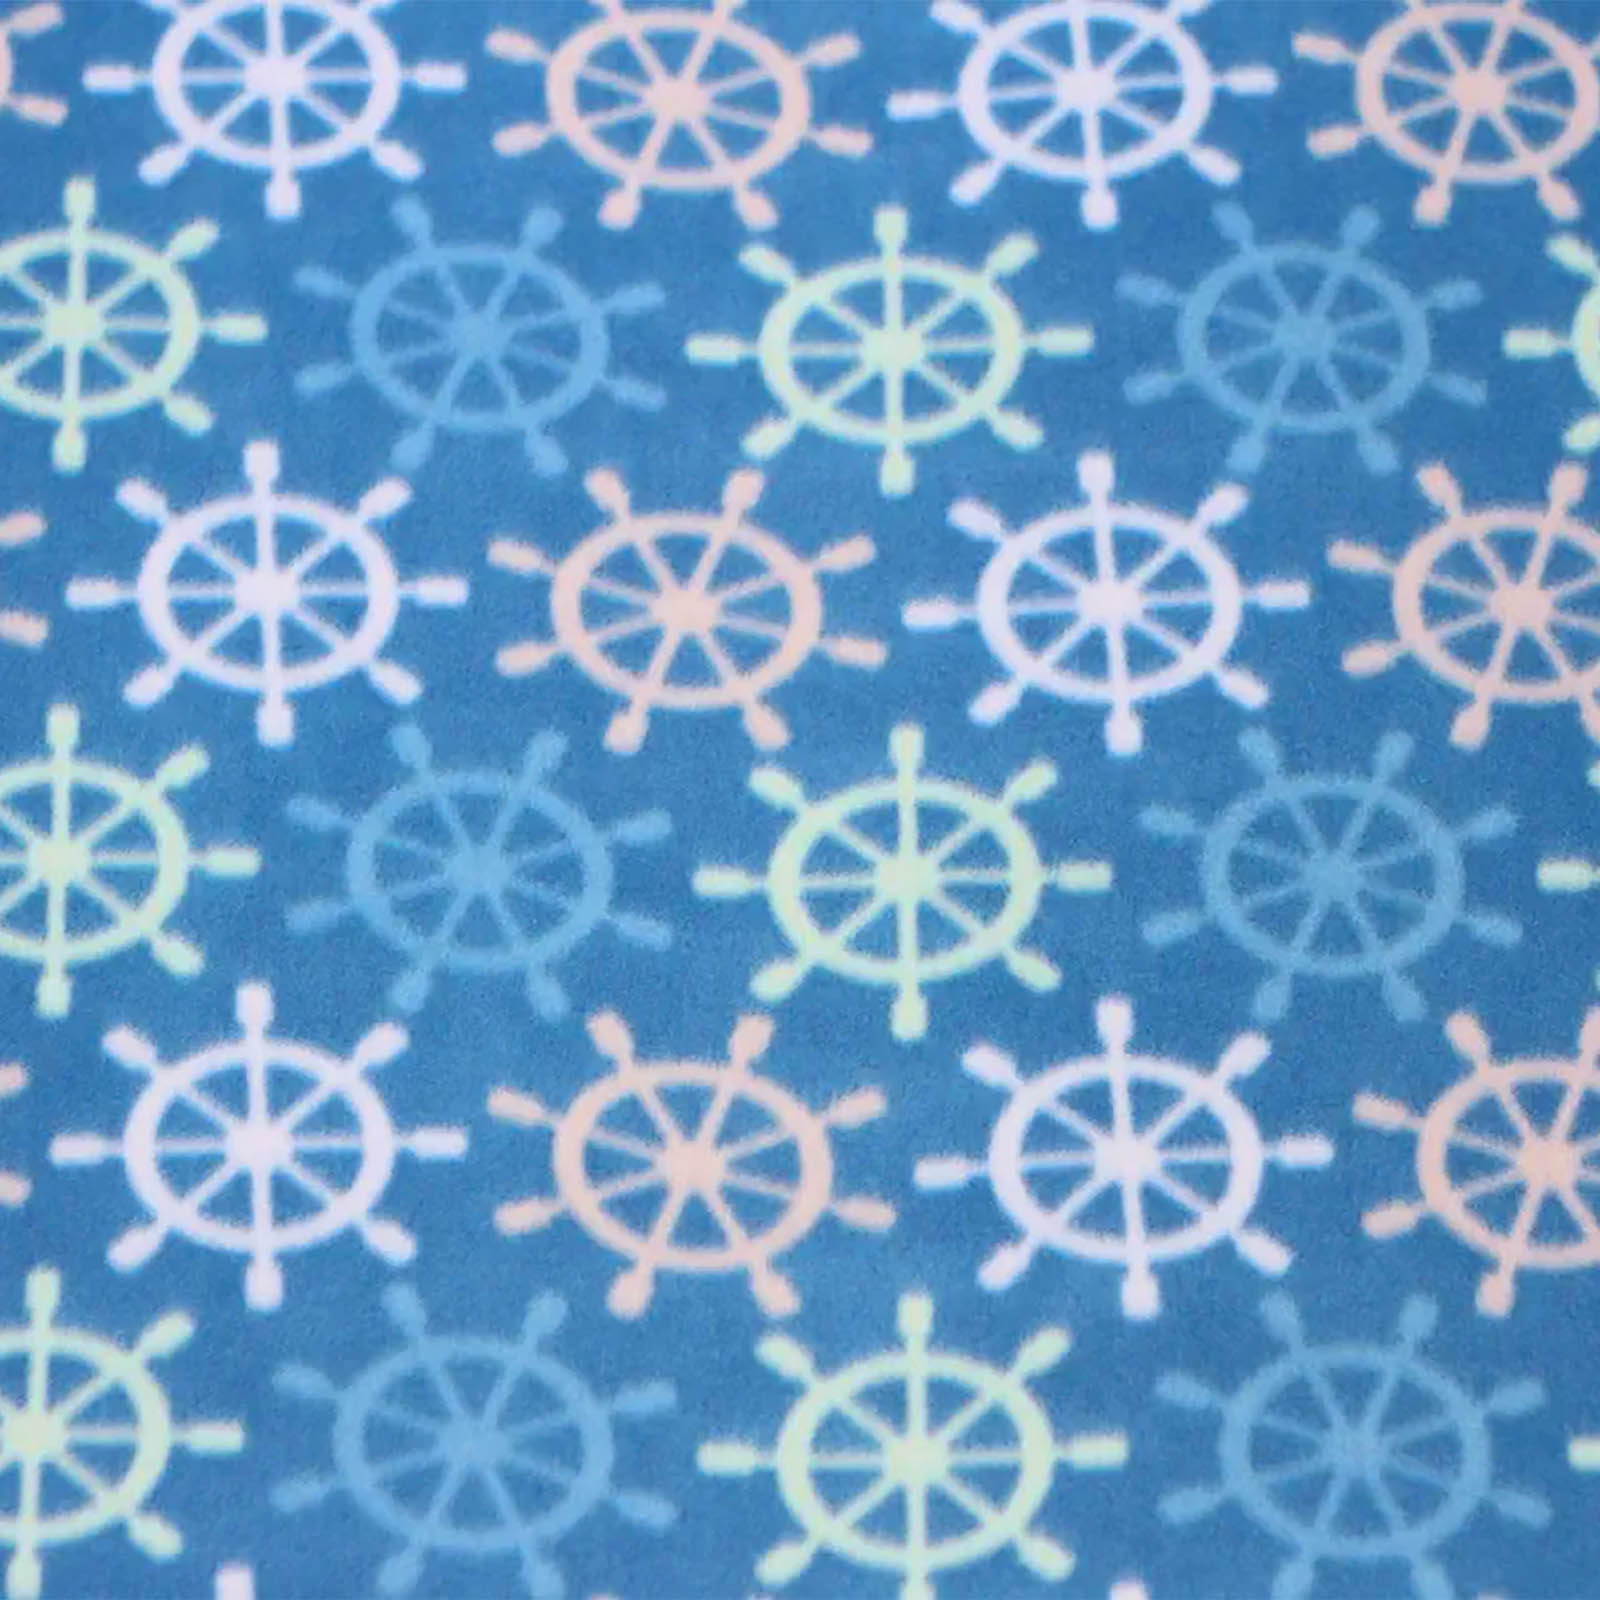 Boat Wheels fabric pattern image for Cagetopia Cages